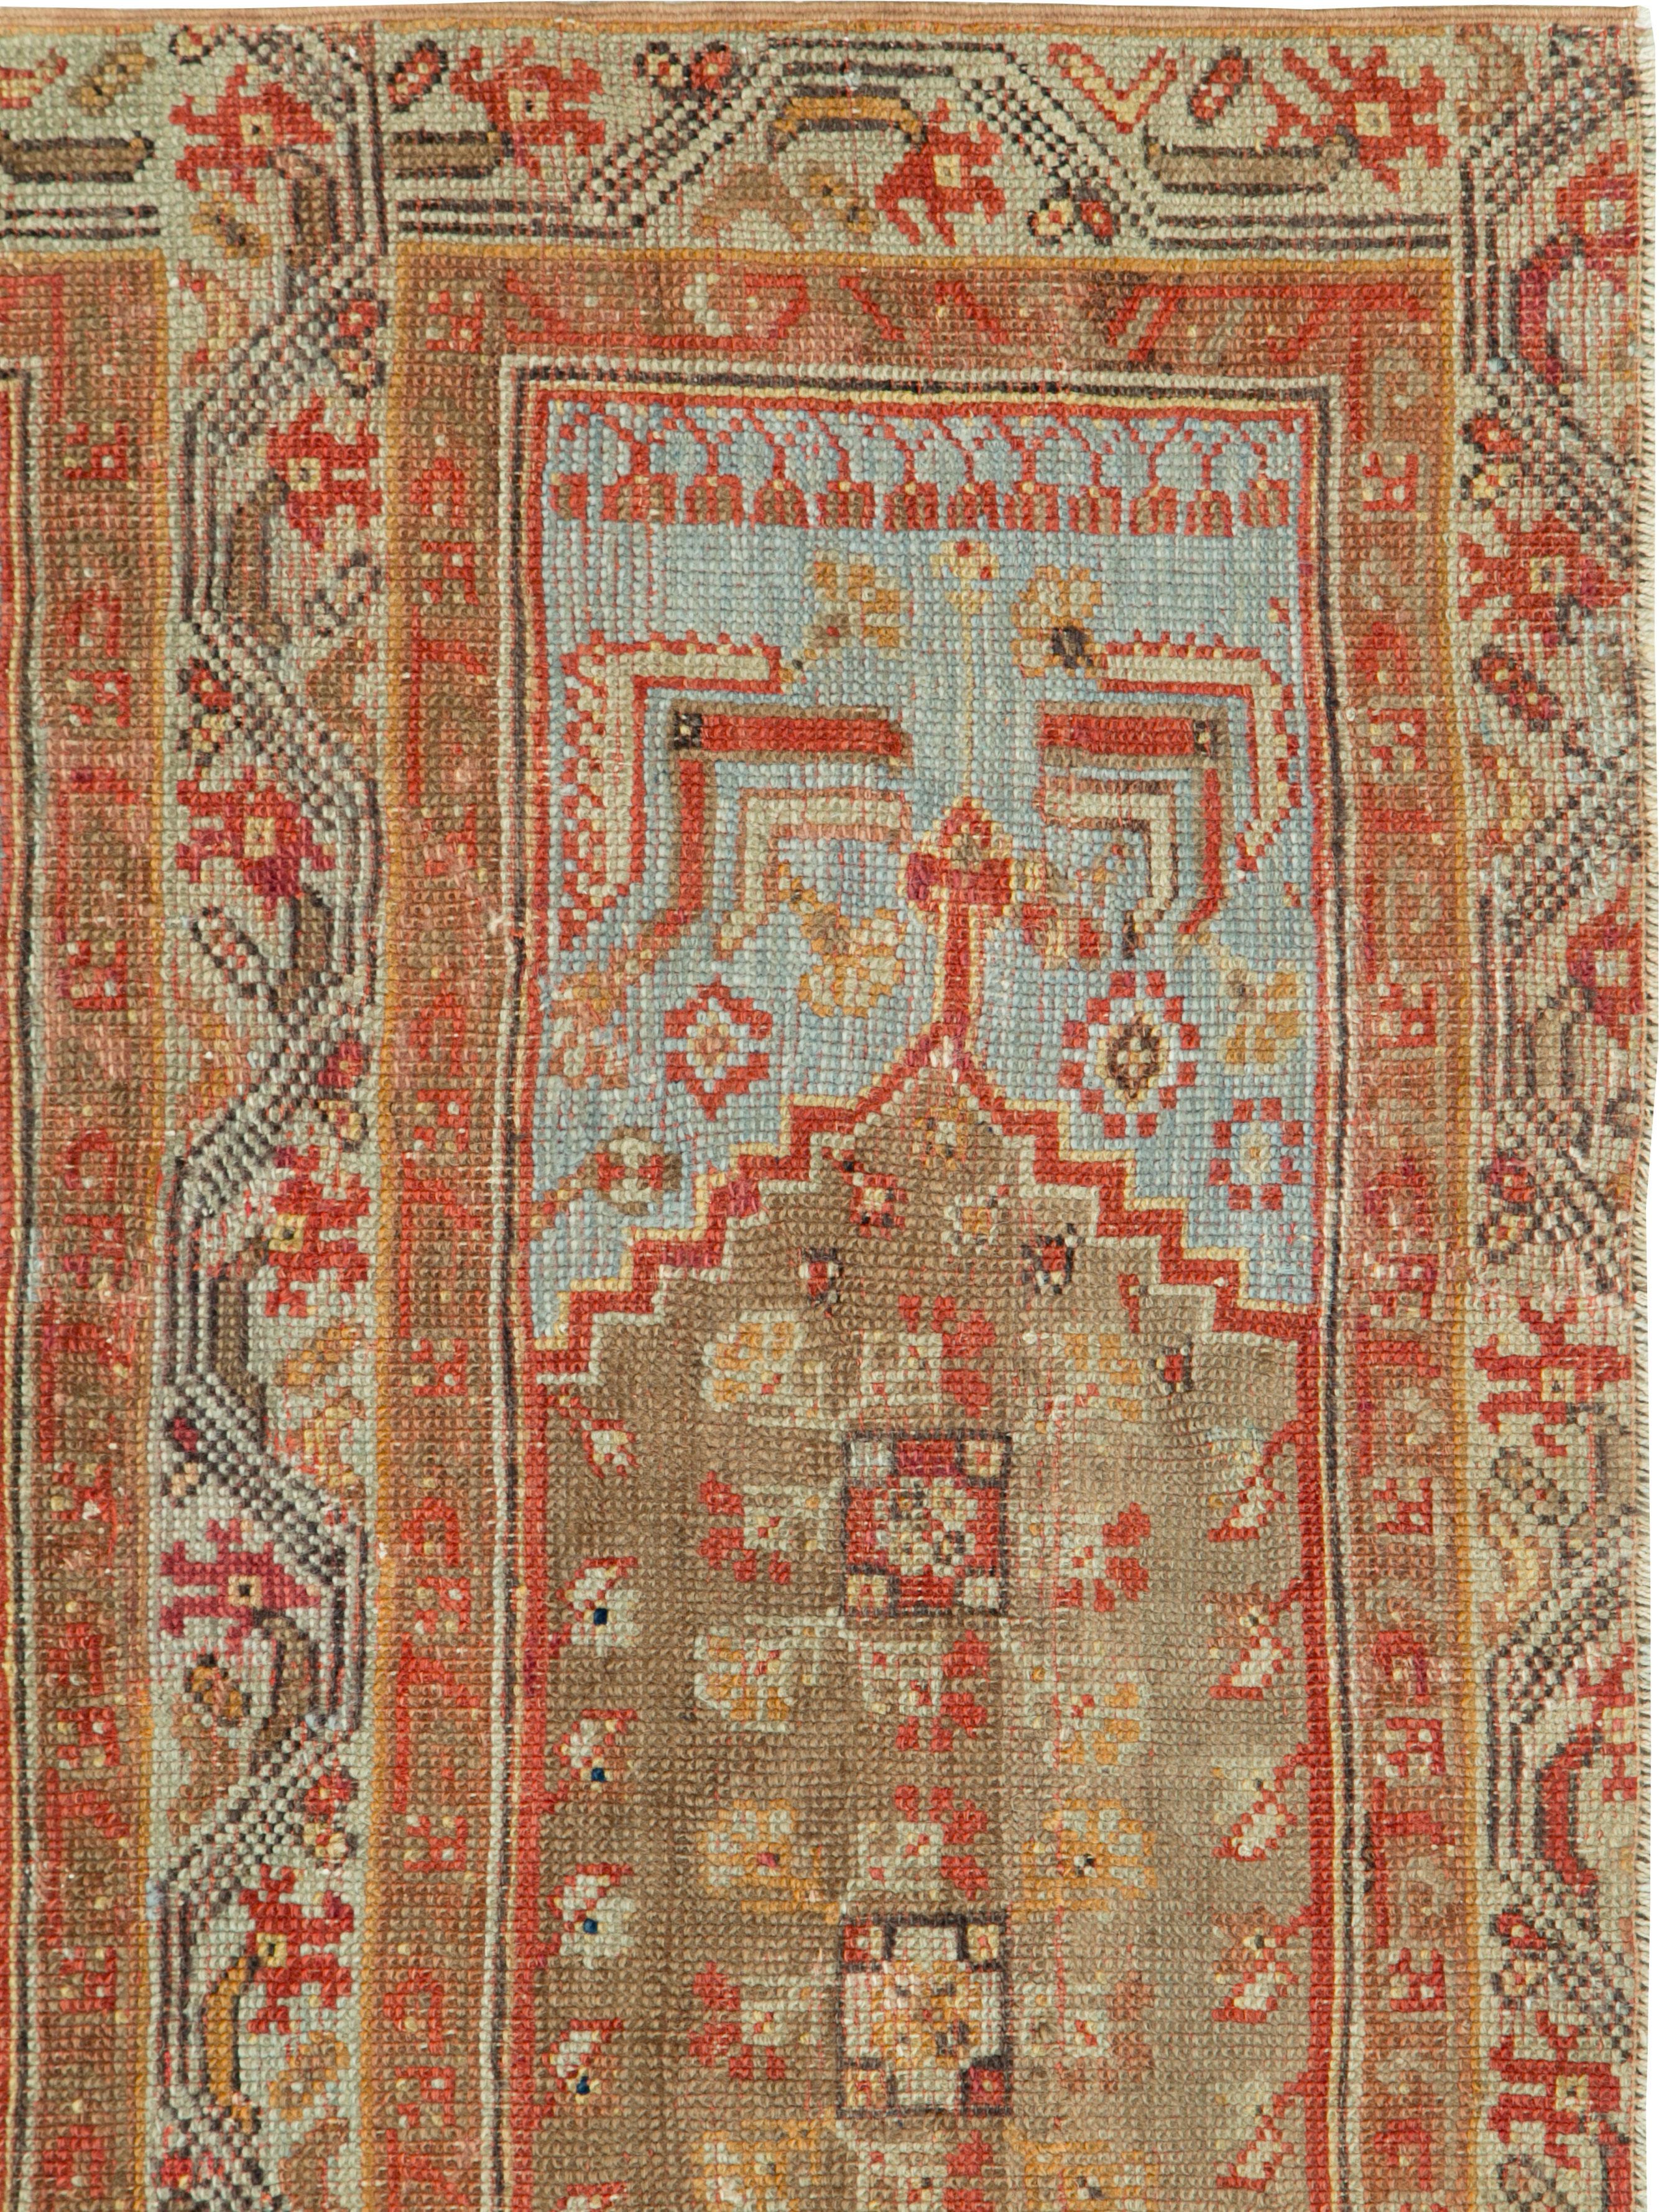 An antique Turkish Ghiordes carpet from the late 19th century.